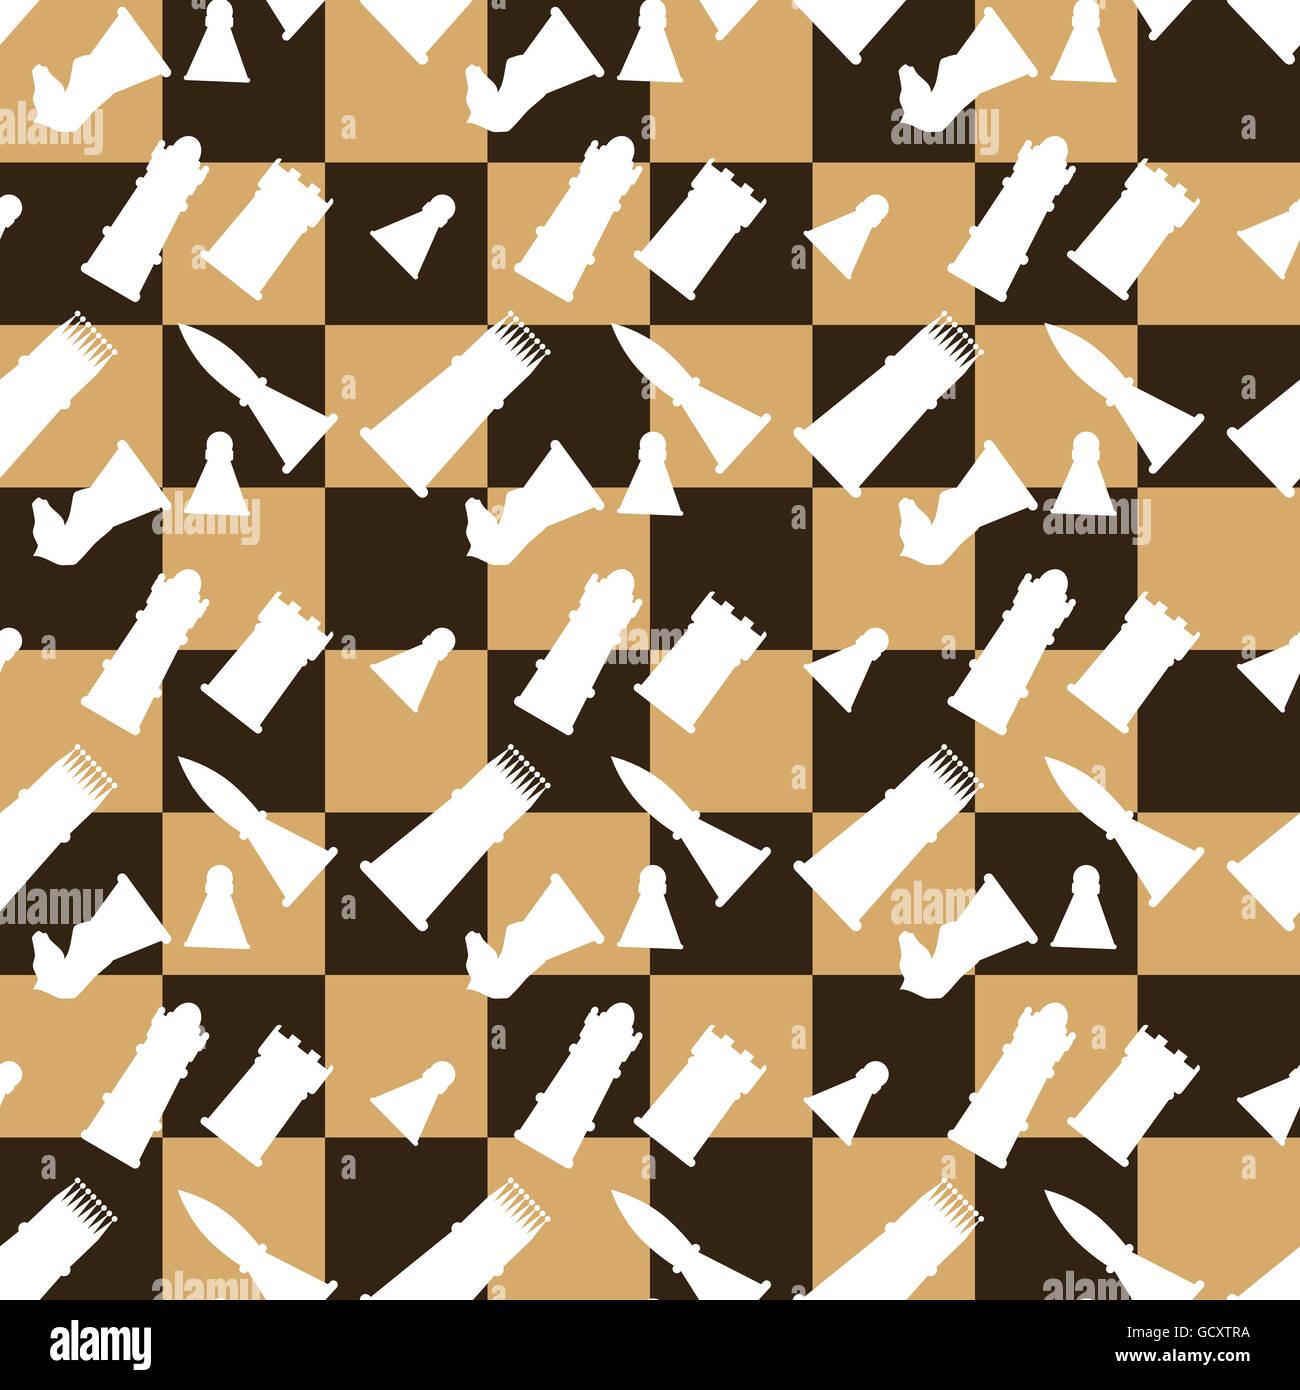 Seamless Chessboard Pattern. Contrast and Bright Mosaic Decoration for  Design, Art, Prints, Wallpaper, Backdrops Stock Illustration - Illustration  of chess, ornament: 166098017